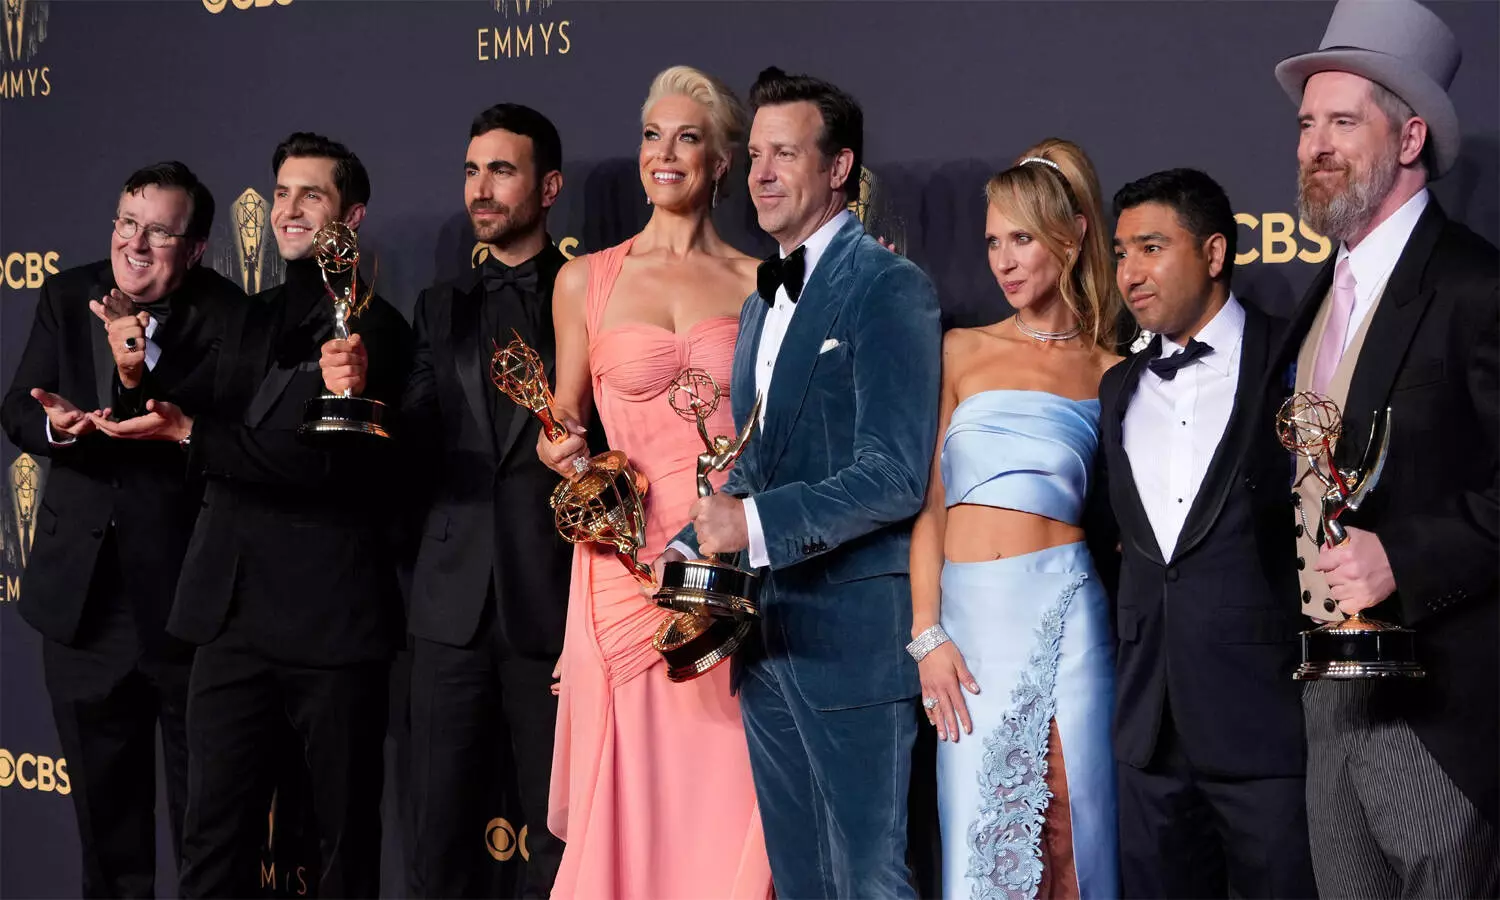 Emmy Awards 2021: From The Crown to Ted Lasso, Full List of WINNERS